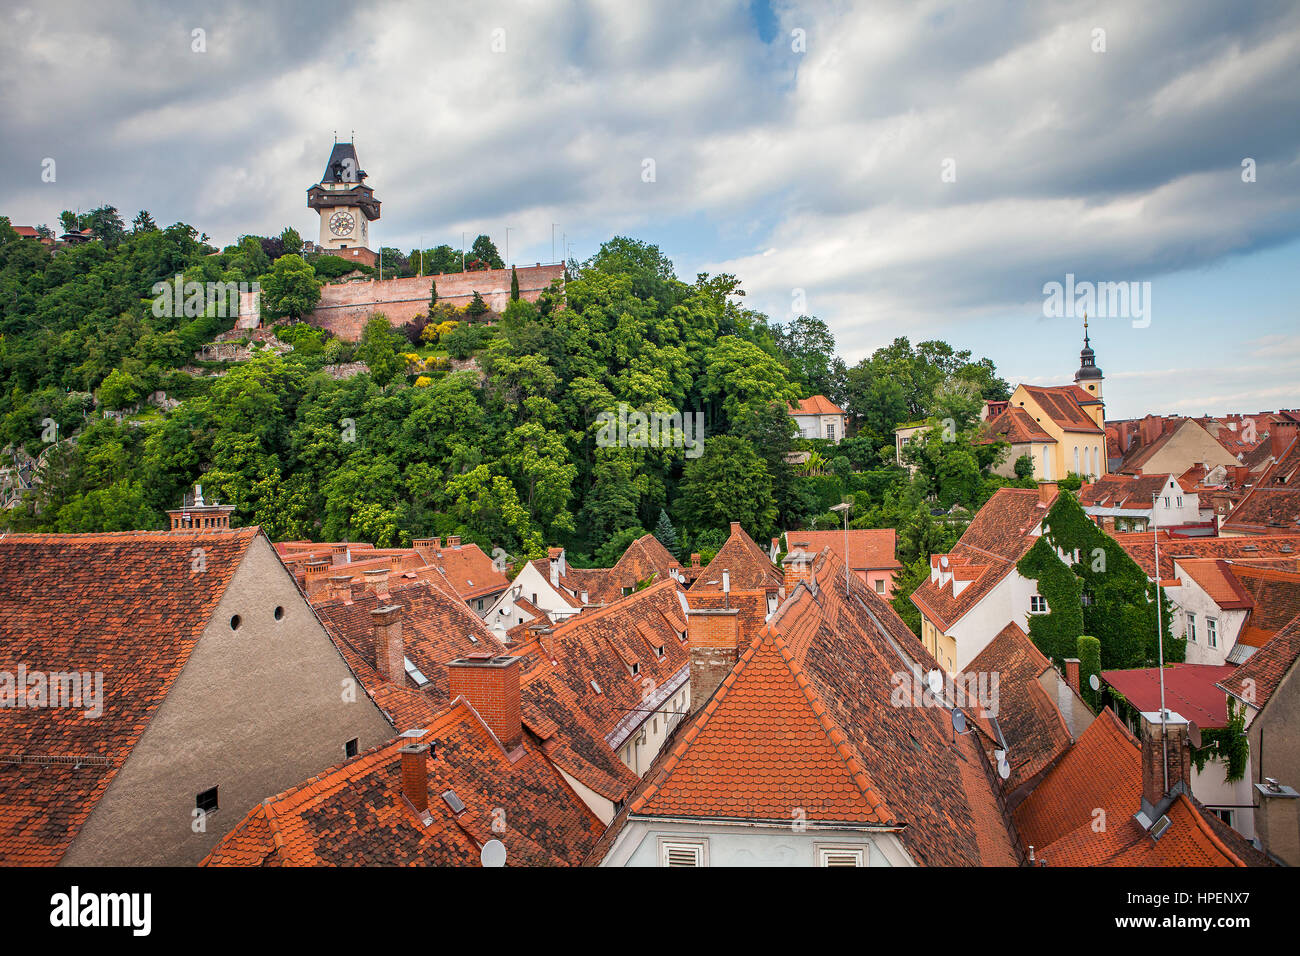 Cityscape with Schlossberg or Castle Hill mountain with old clock tower Uhrturm, Graz, Austria Stock Photo